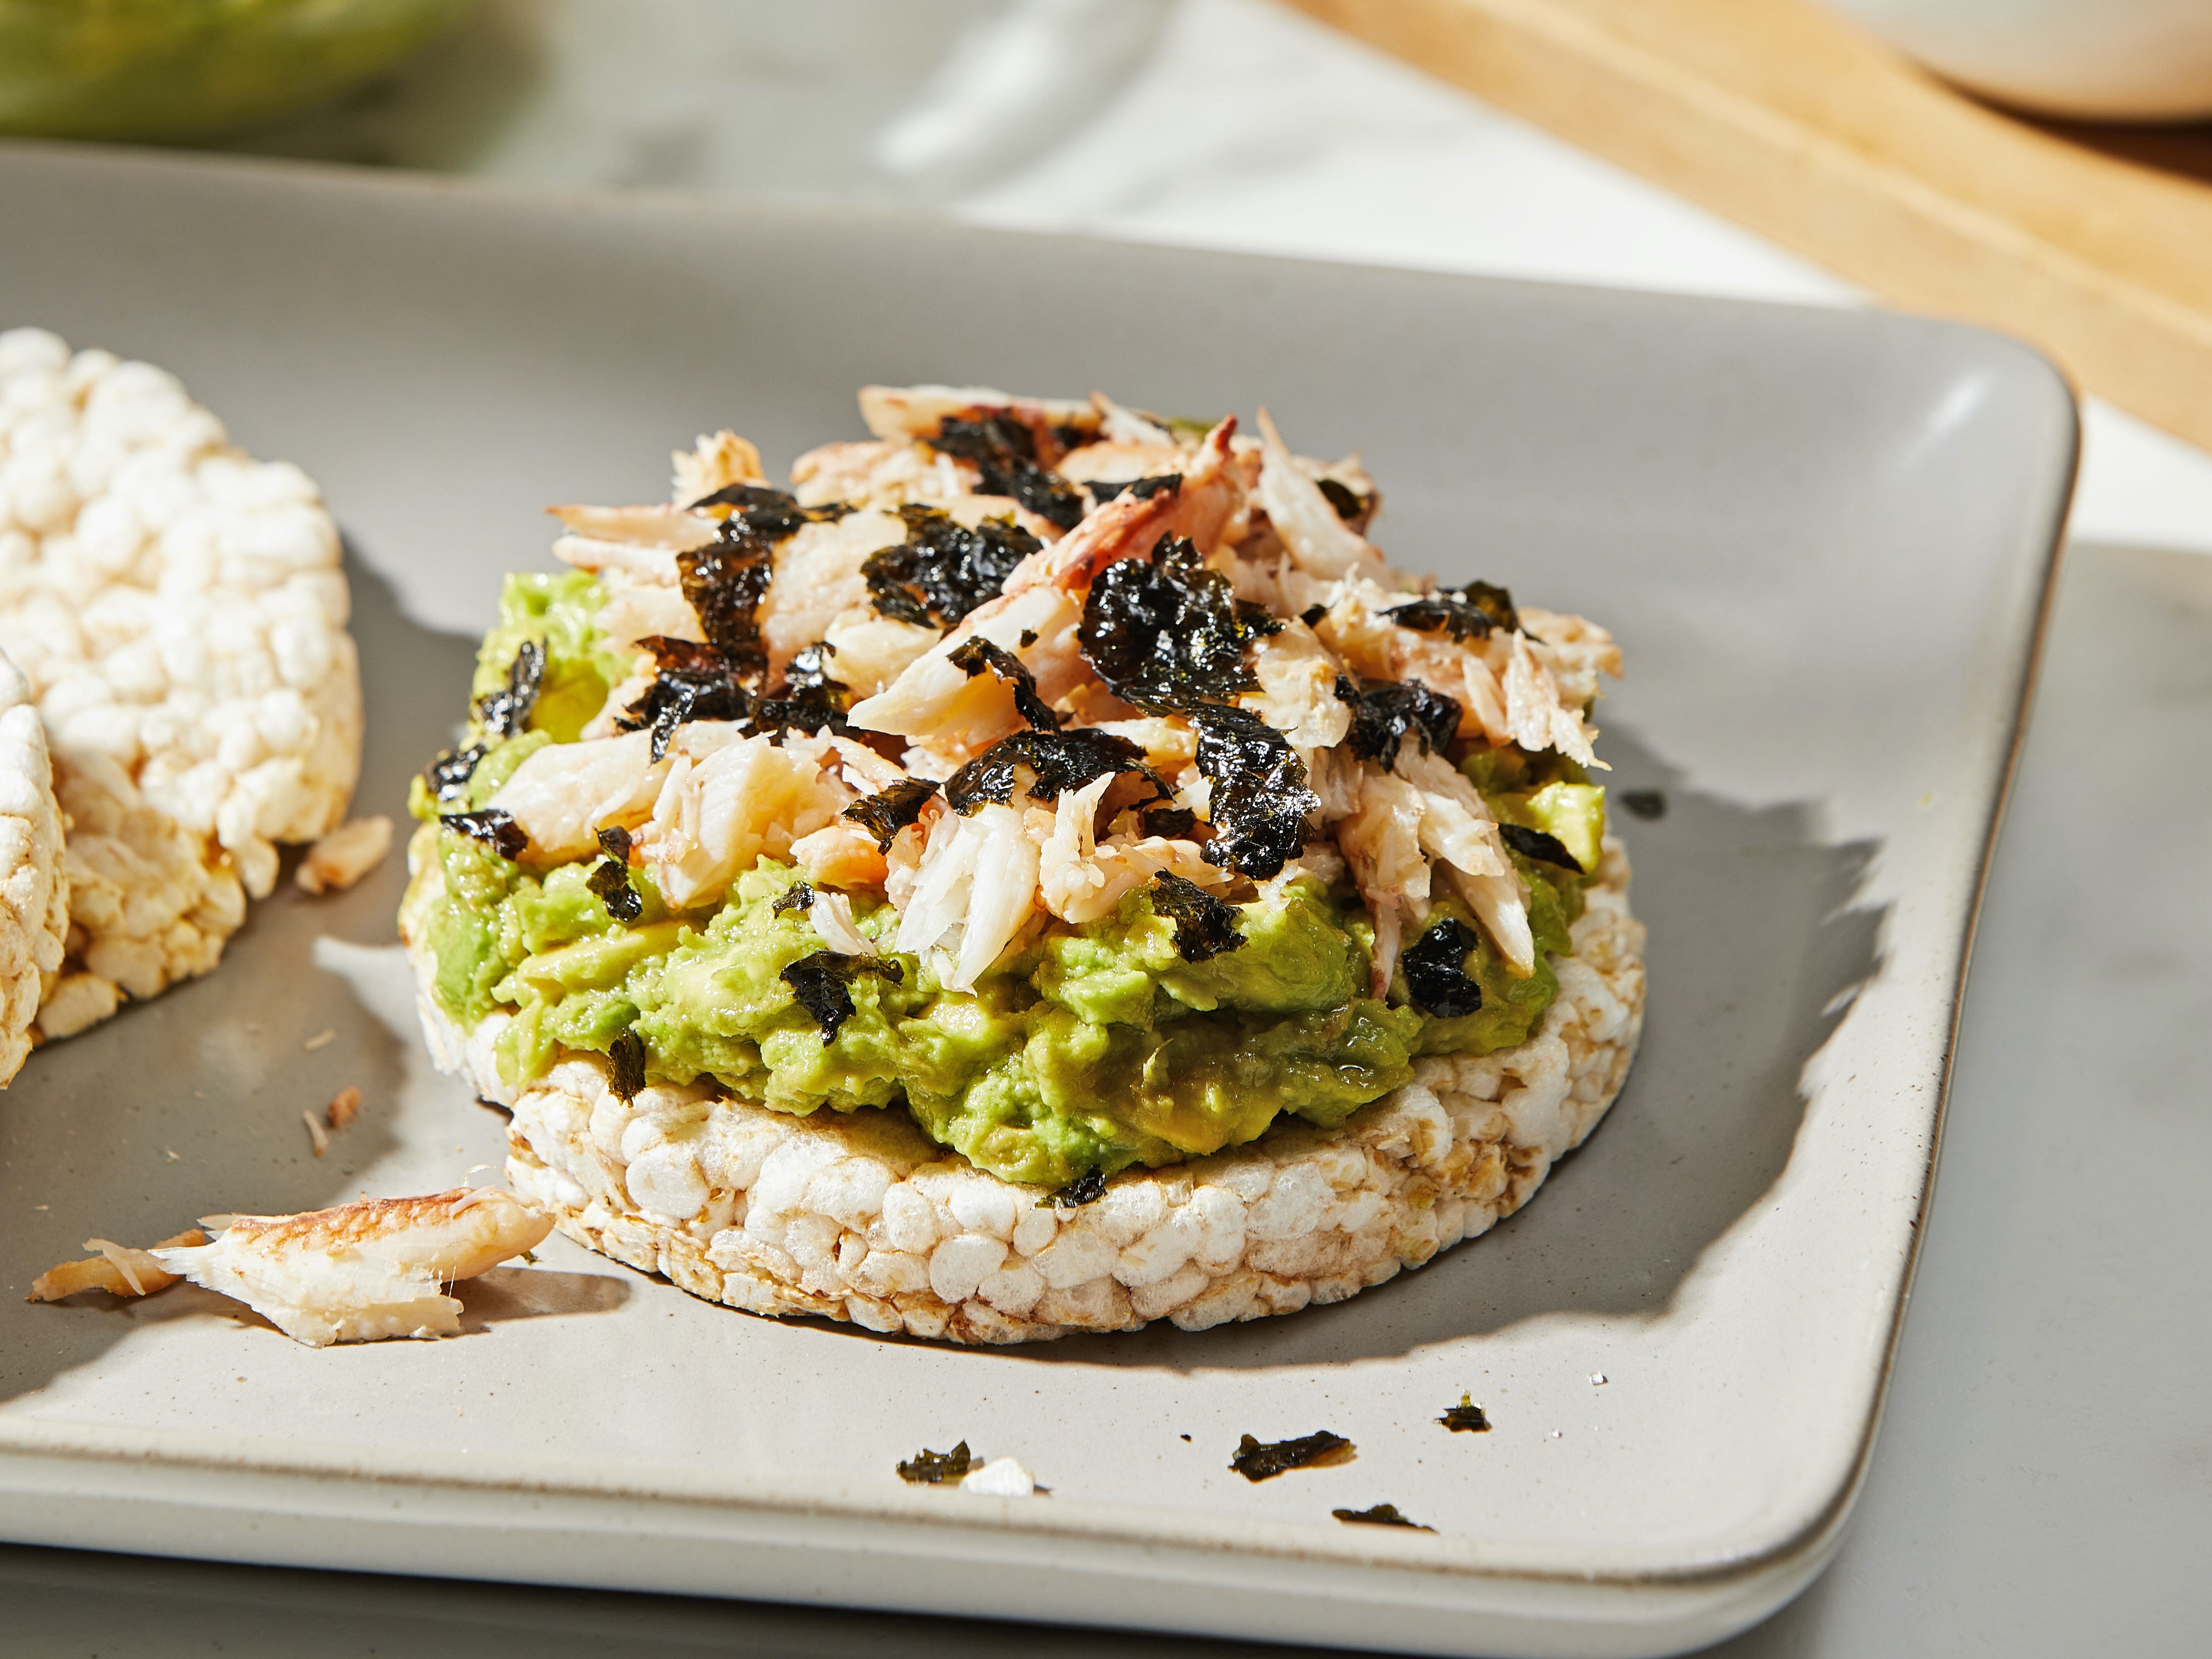 The creaminess of the avocado with the crunch of the rice cake makes this a standout dish.